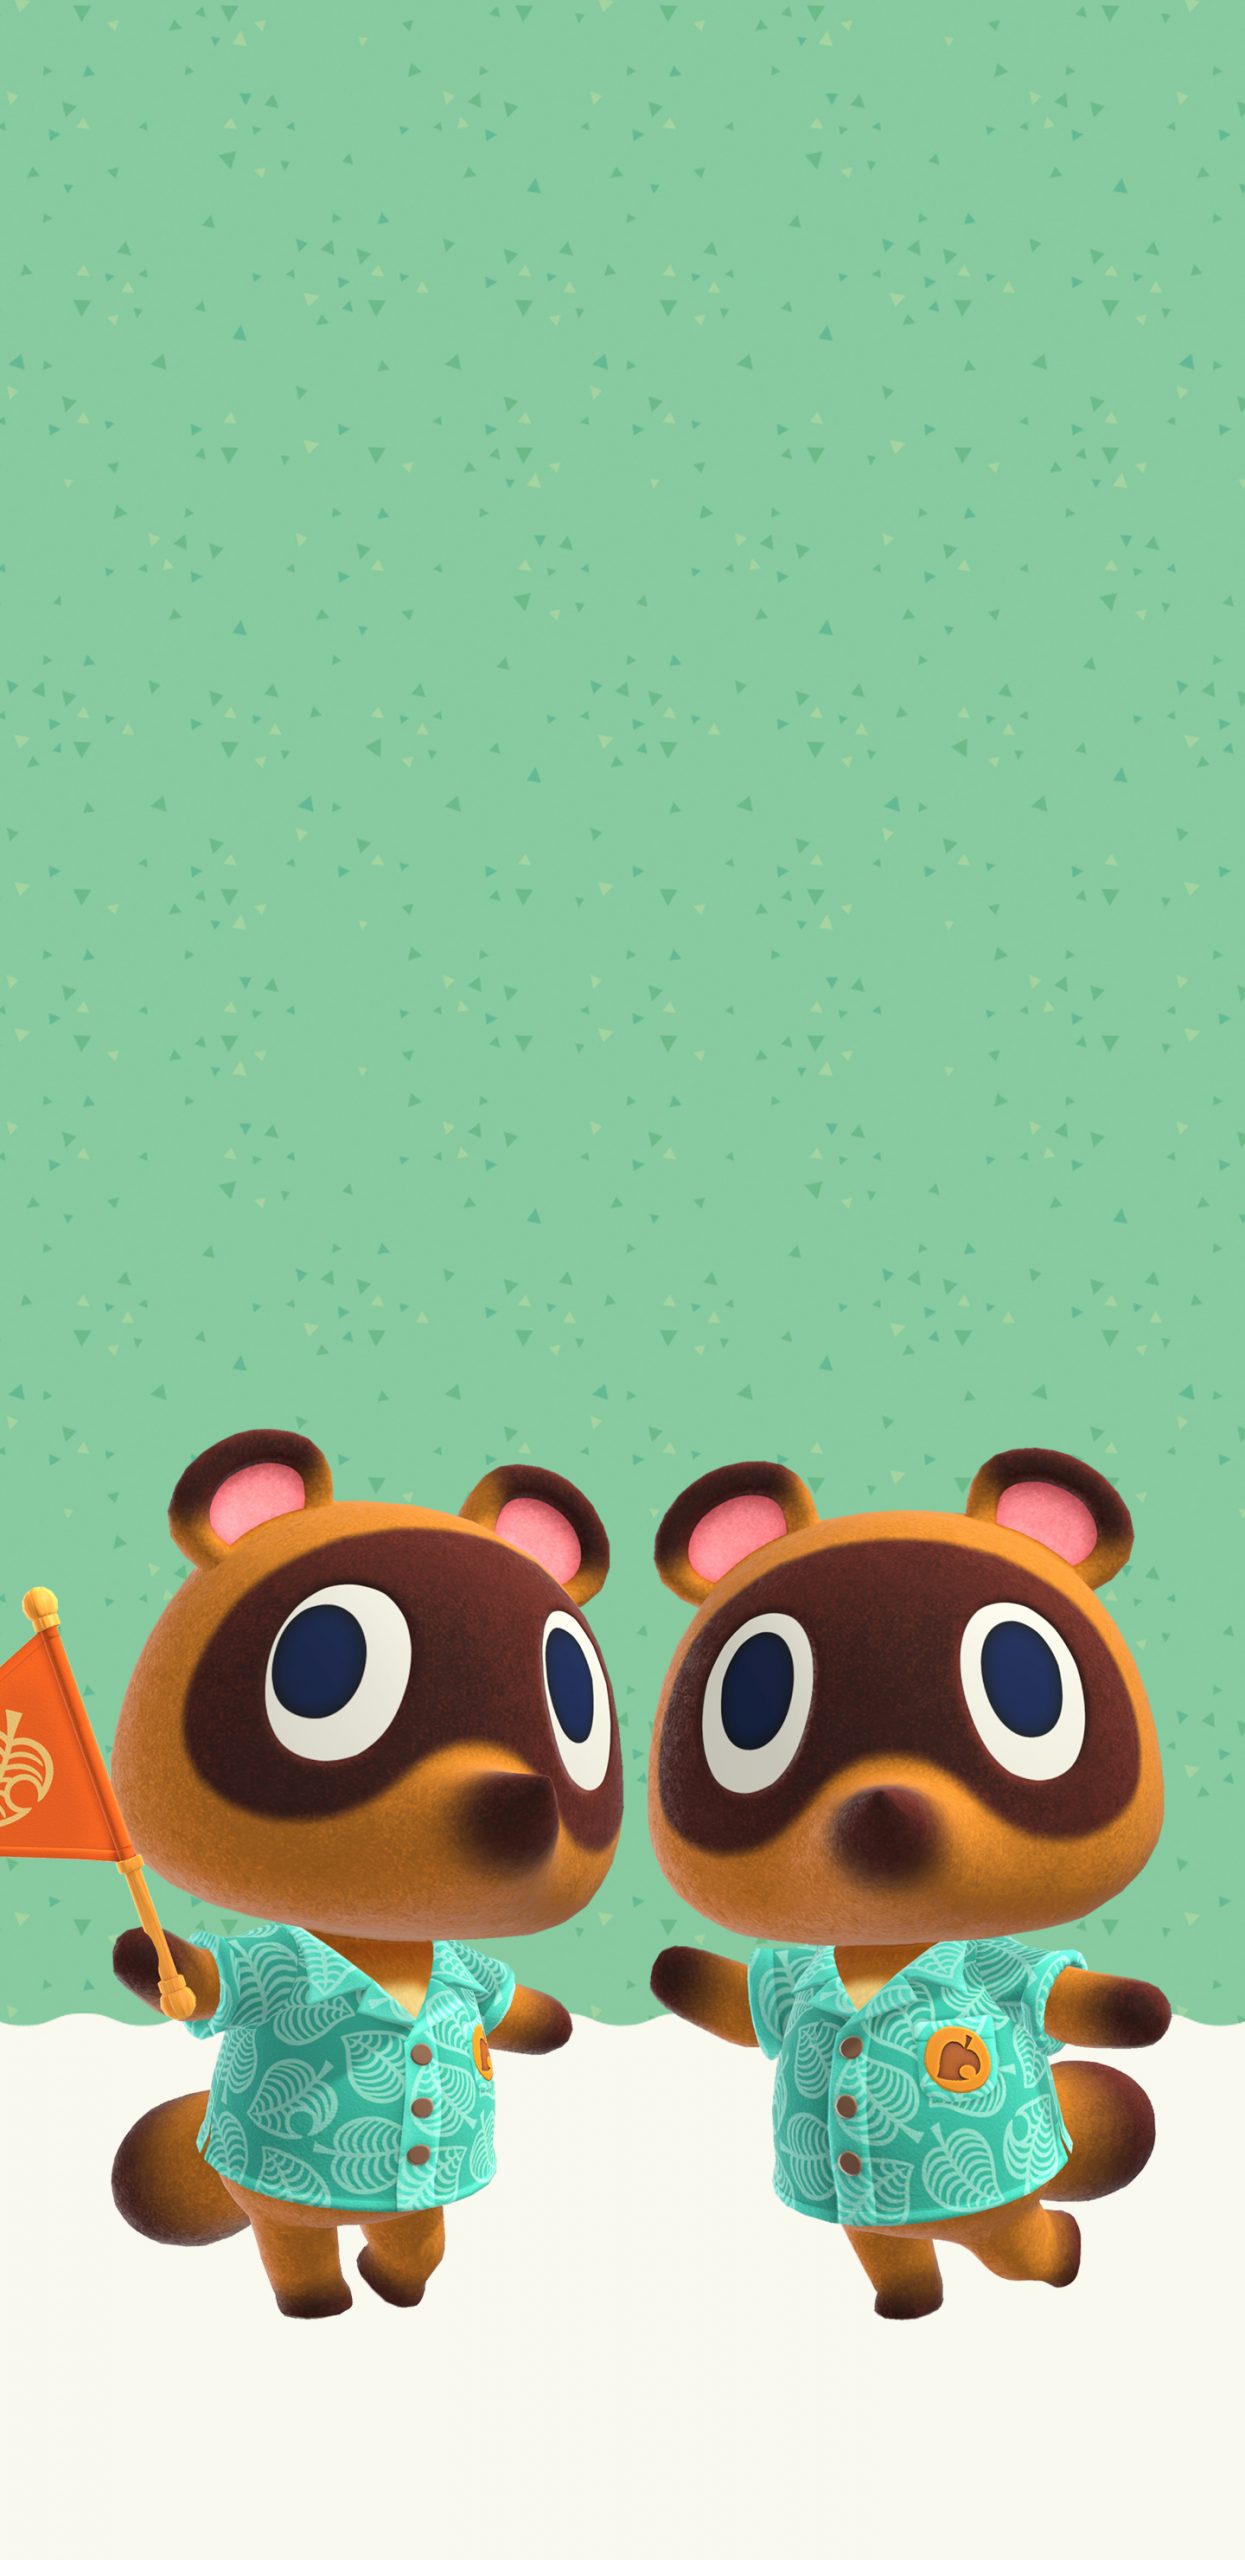 Animal Crossing New Horizons Timmy and Tommy Version 2 Wallpaper with Monocle